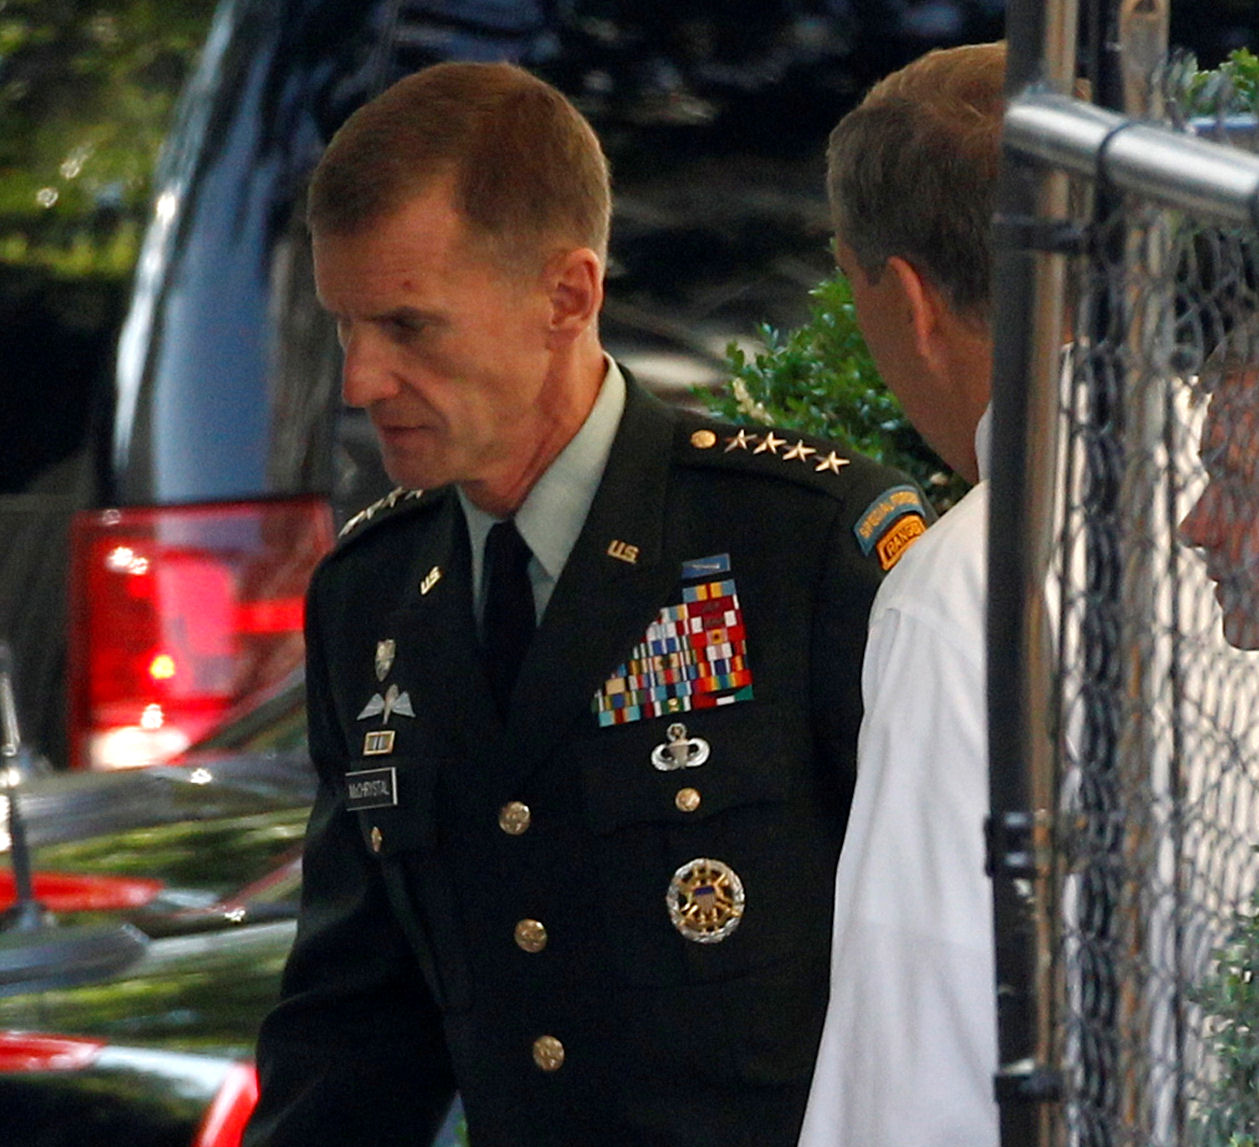 General Stanley McChrystal arrives at the White House (credit: Reuters)